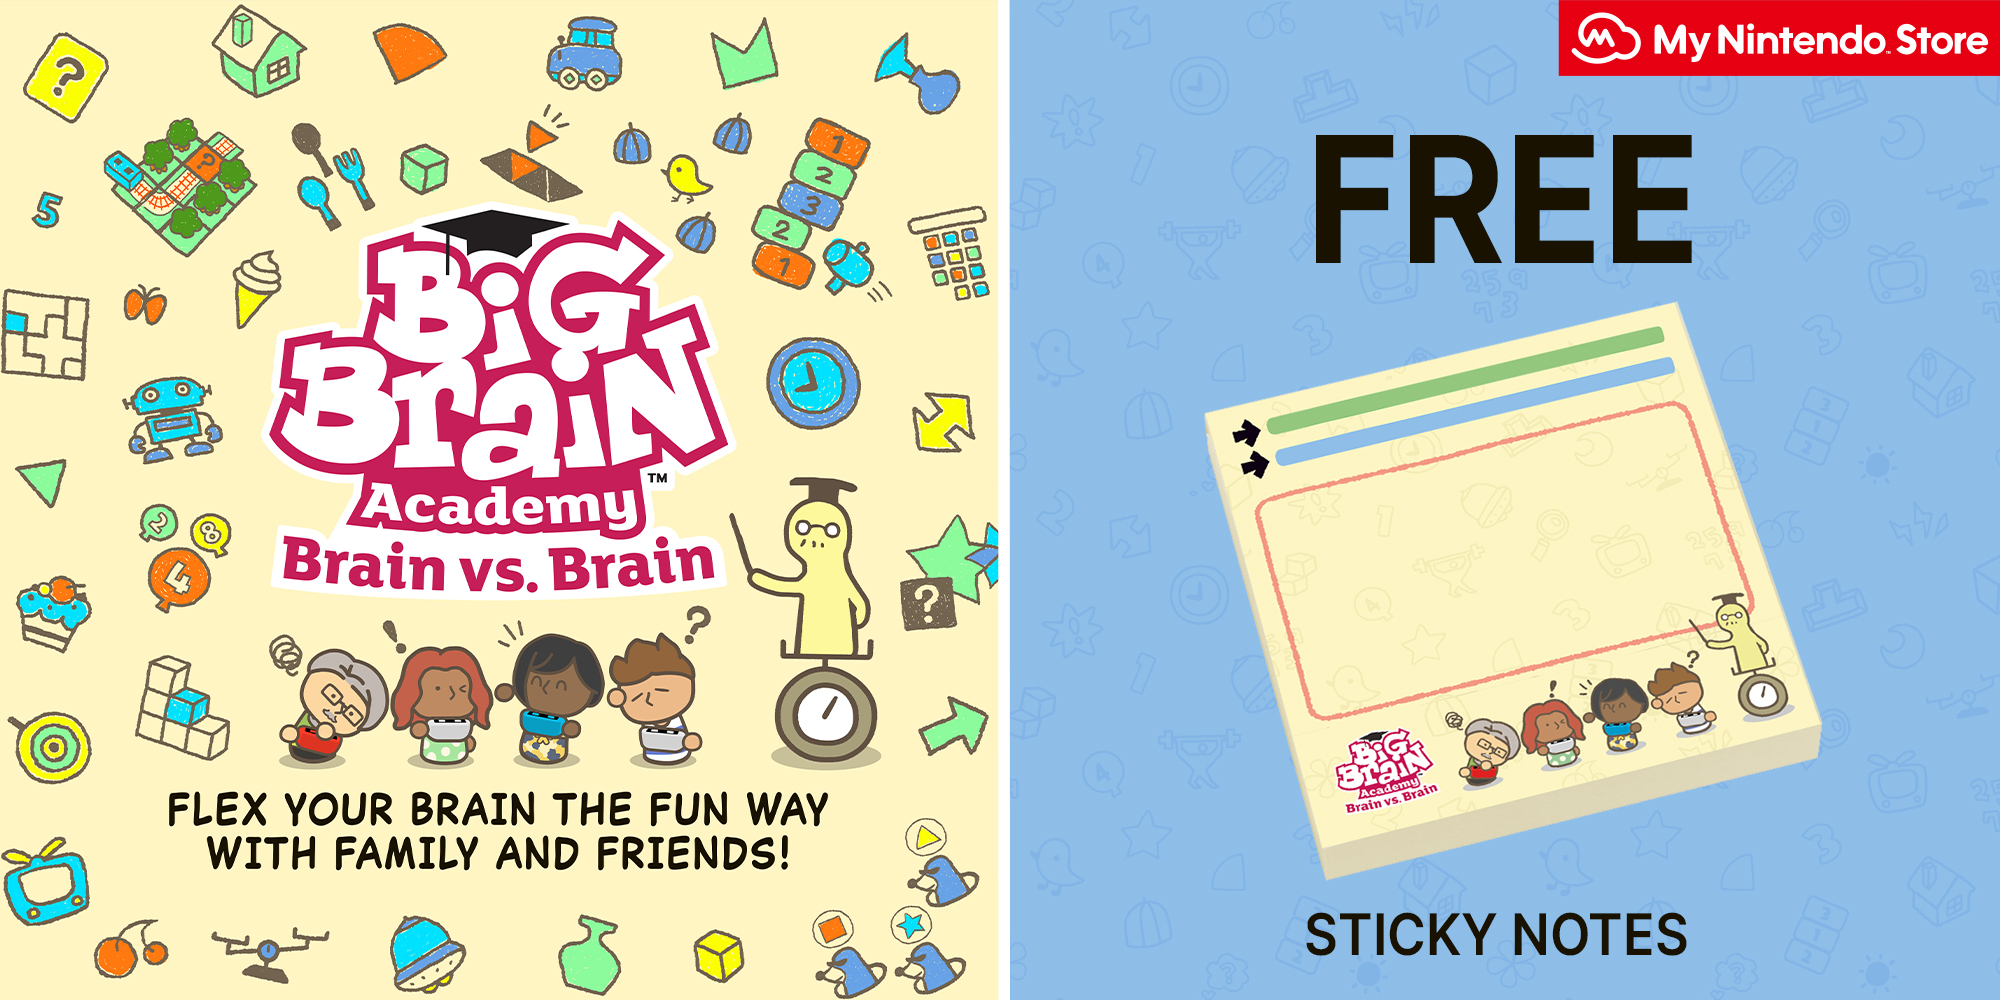 Nintendo Uk Big Brain Academy Brain Vs Brain Comes To Nintendo Switch On 3rd December Pre Order Now On My Nintendo Store And Receive Free Sticky Notes Already Pre Ordered Your Order